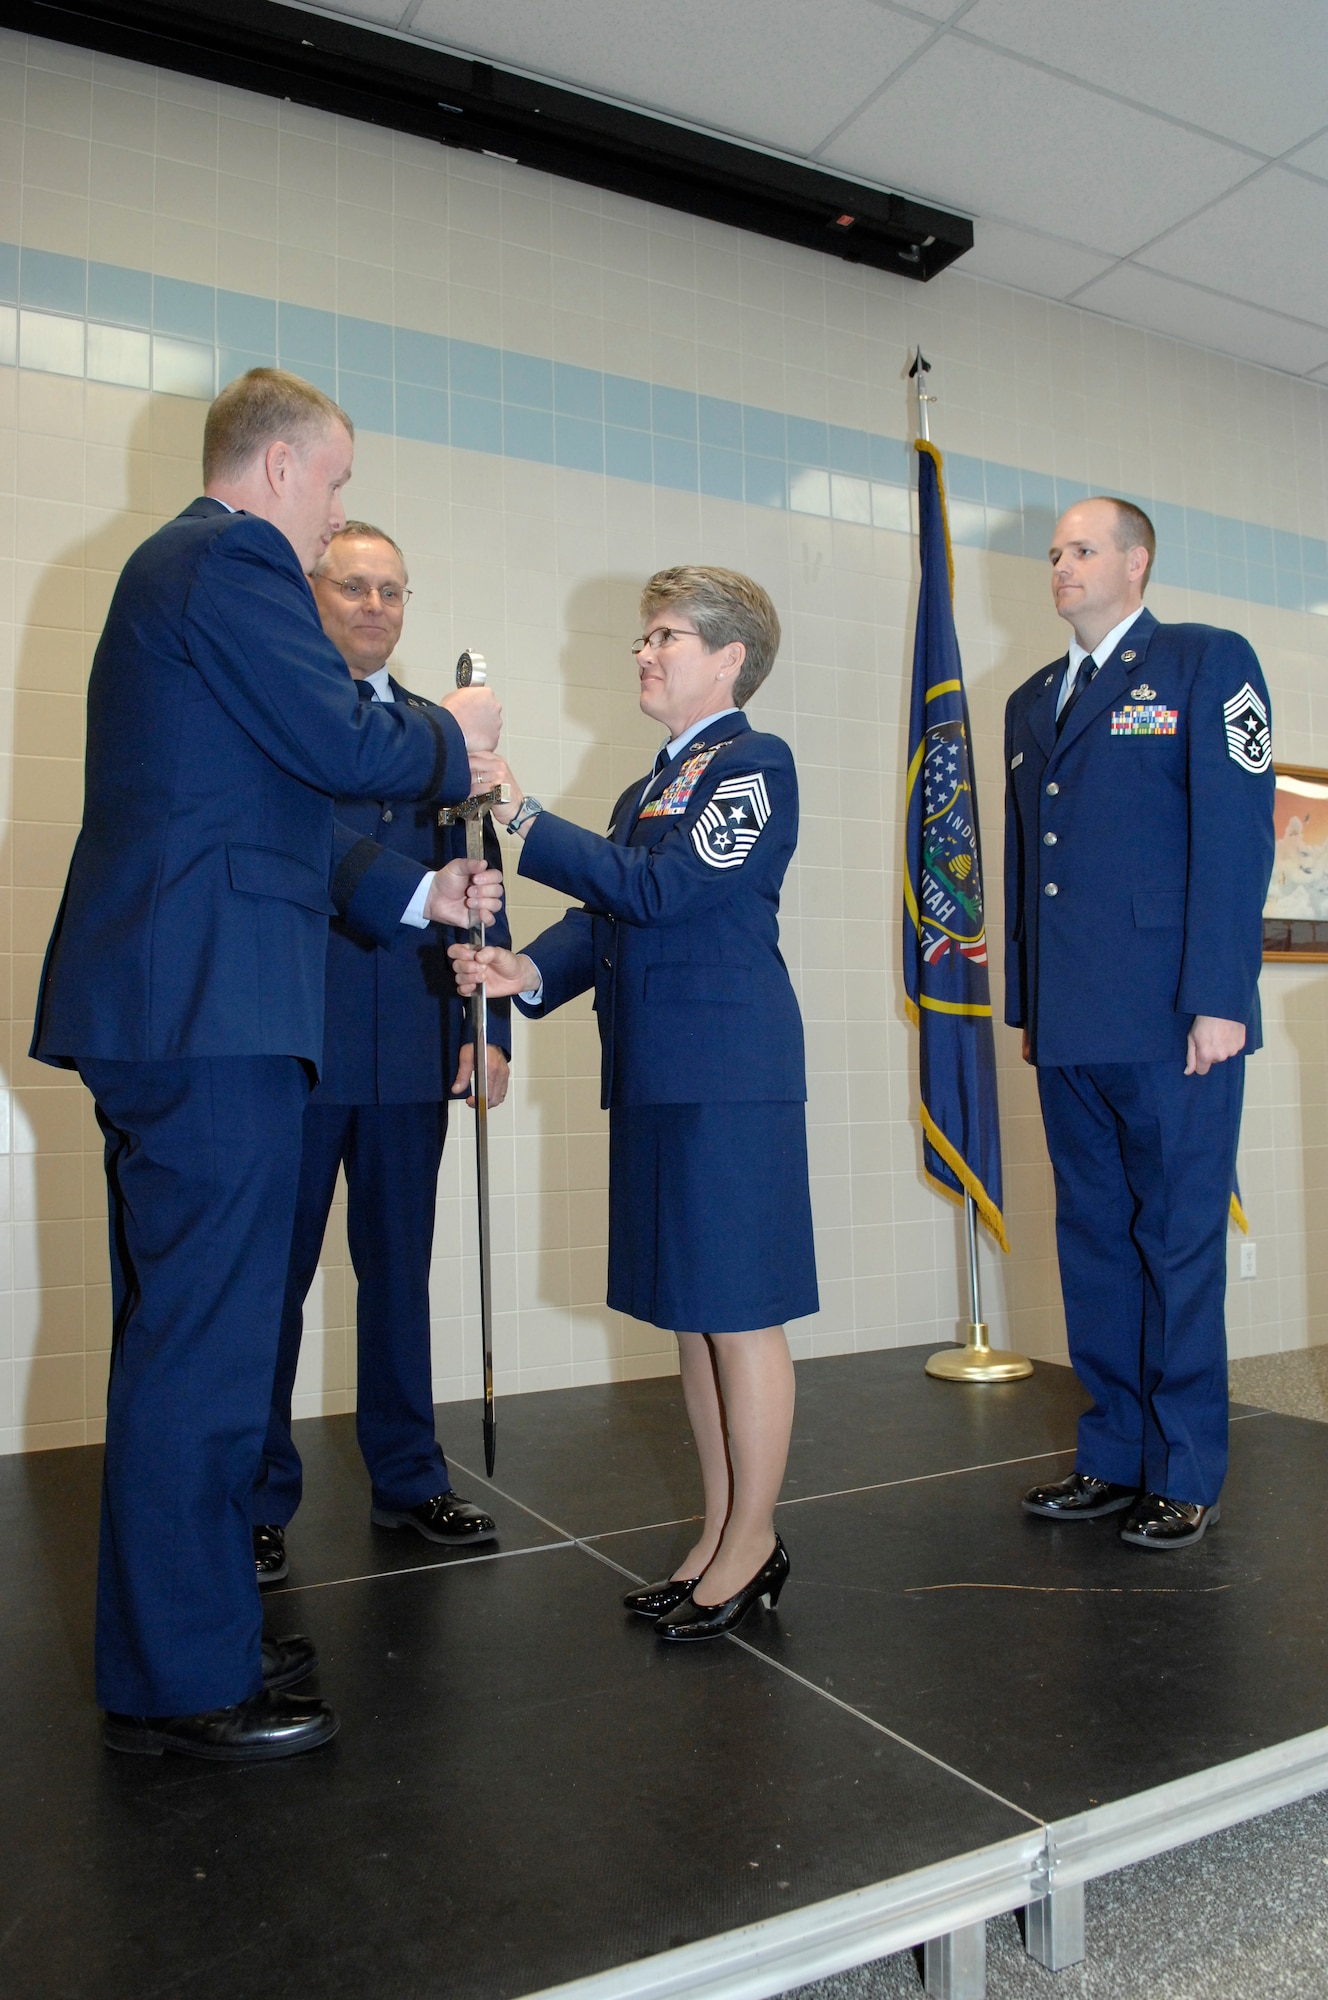 Relinquishing her position as the top enlisted service member in the Utah Air National Guard, State Command Chief Master Sgt. Denise Rager passes the sword to the Director of the Utah National Guard's Joint Staff, Brig. Gen. Kenneth L. Gammon, during a ceremony at the Utah ANG base, April 6. In the passing-of-the-sword ceremony, the sword represents the duties and responsibilities of the State Command Chief Position. Chief Master Sgt. Michael Edwards then assumed position as the new State Command Chief. (U.S. Air Force photo by Senior Master Sgt. Gary Rihn)(RELEASED)